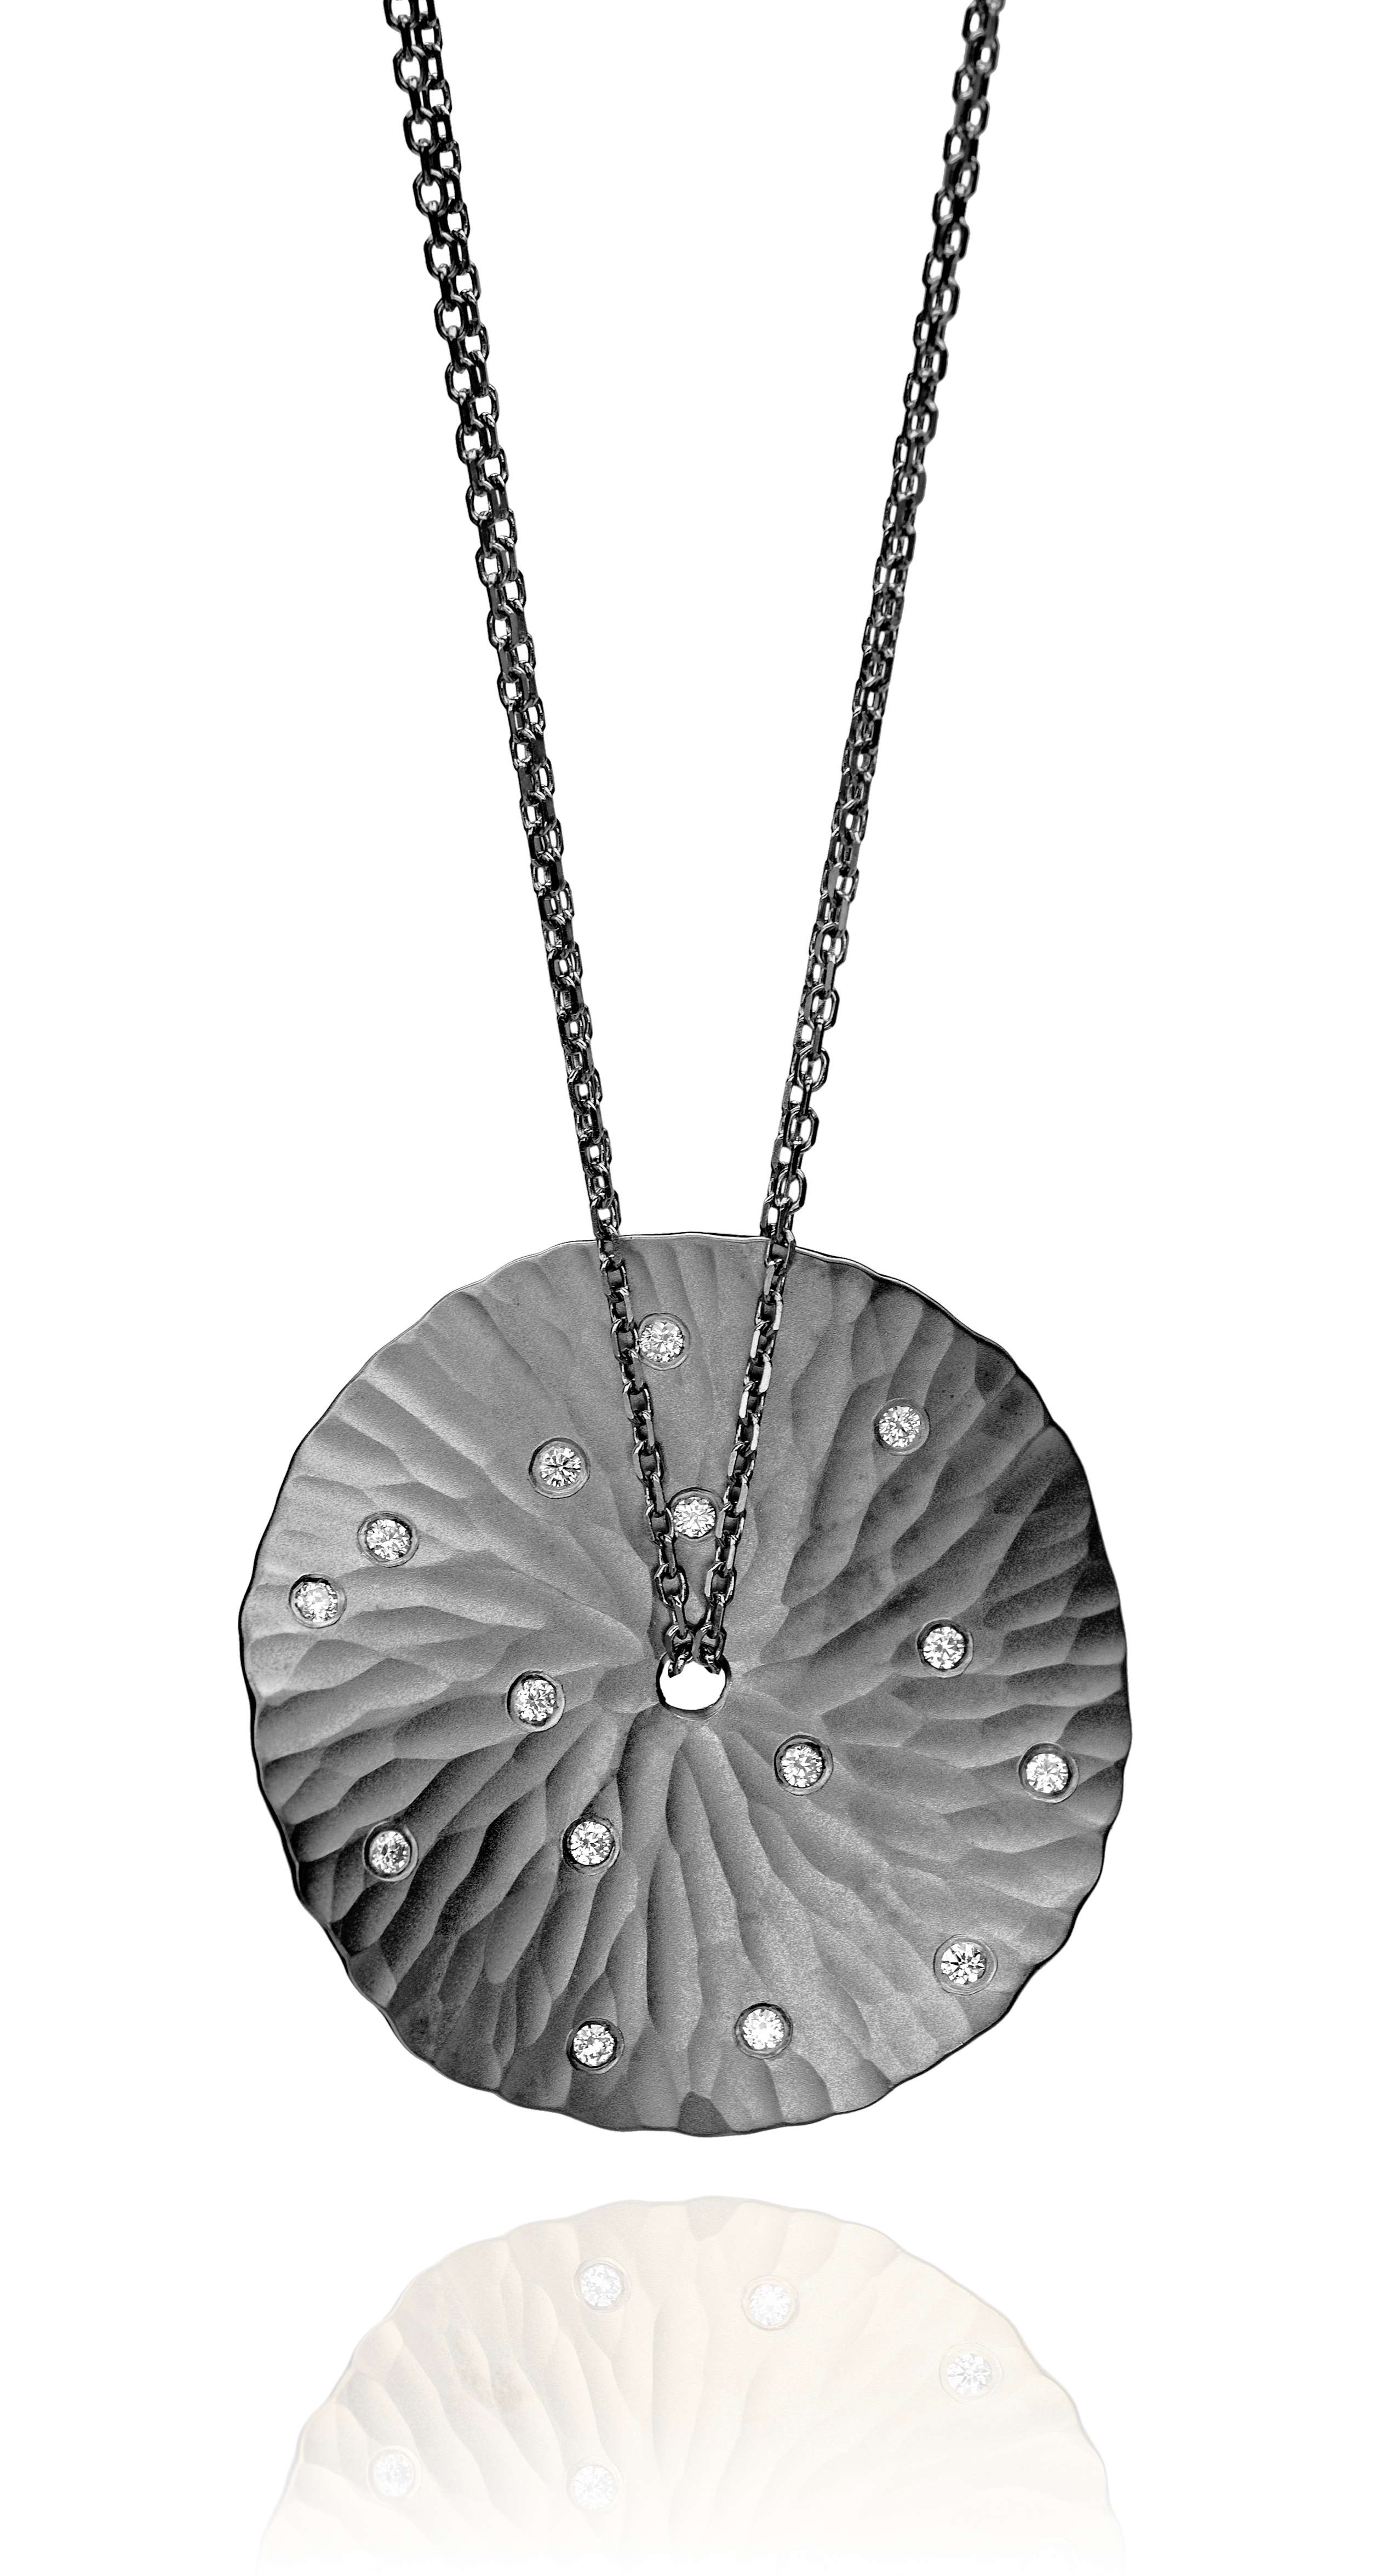 Hammered Sterling Silver Disc Pendant with Chain